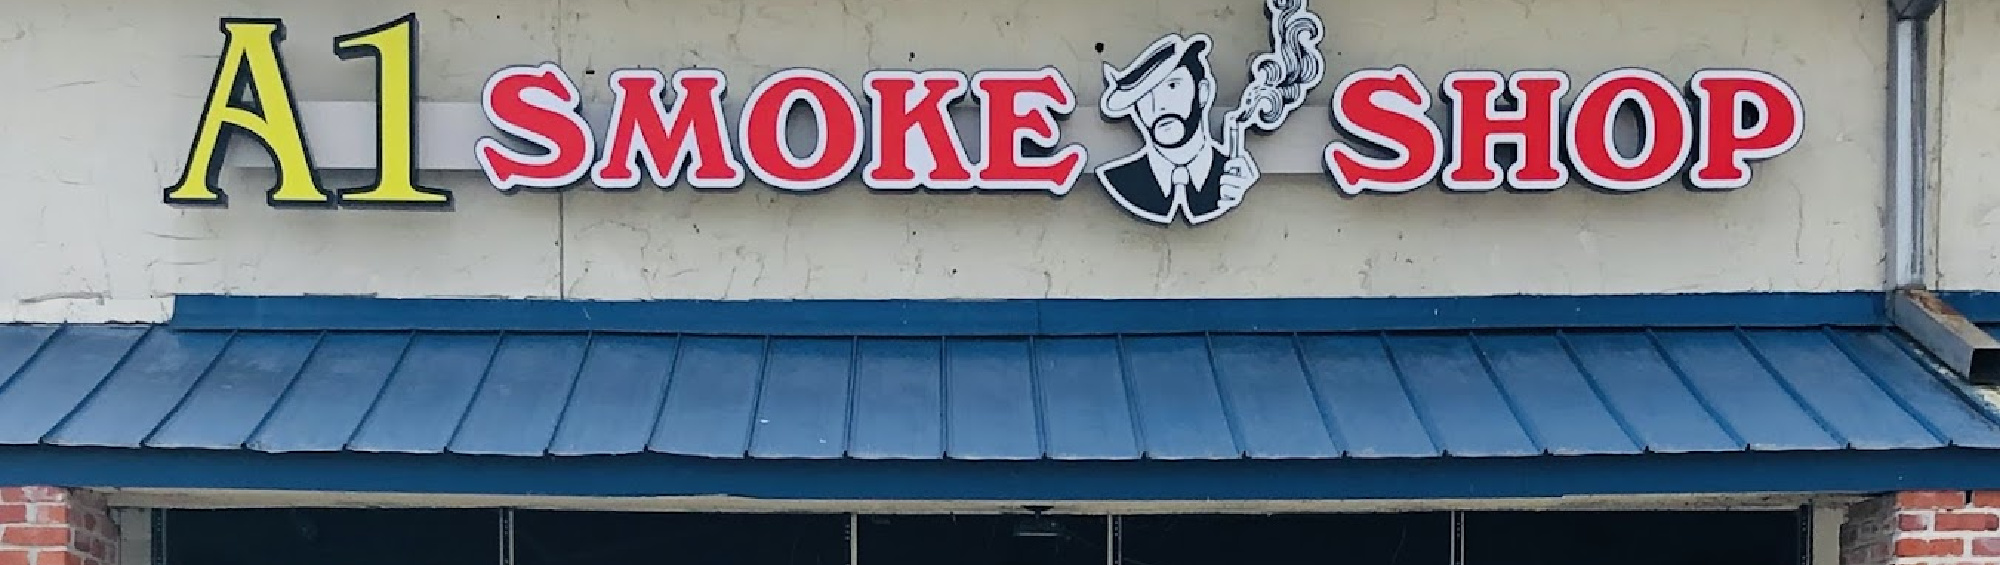 image of a1 smoke shop in tallahassee fl